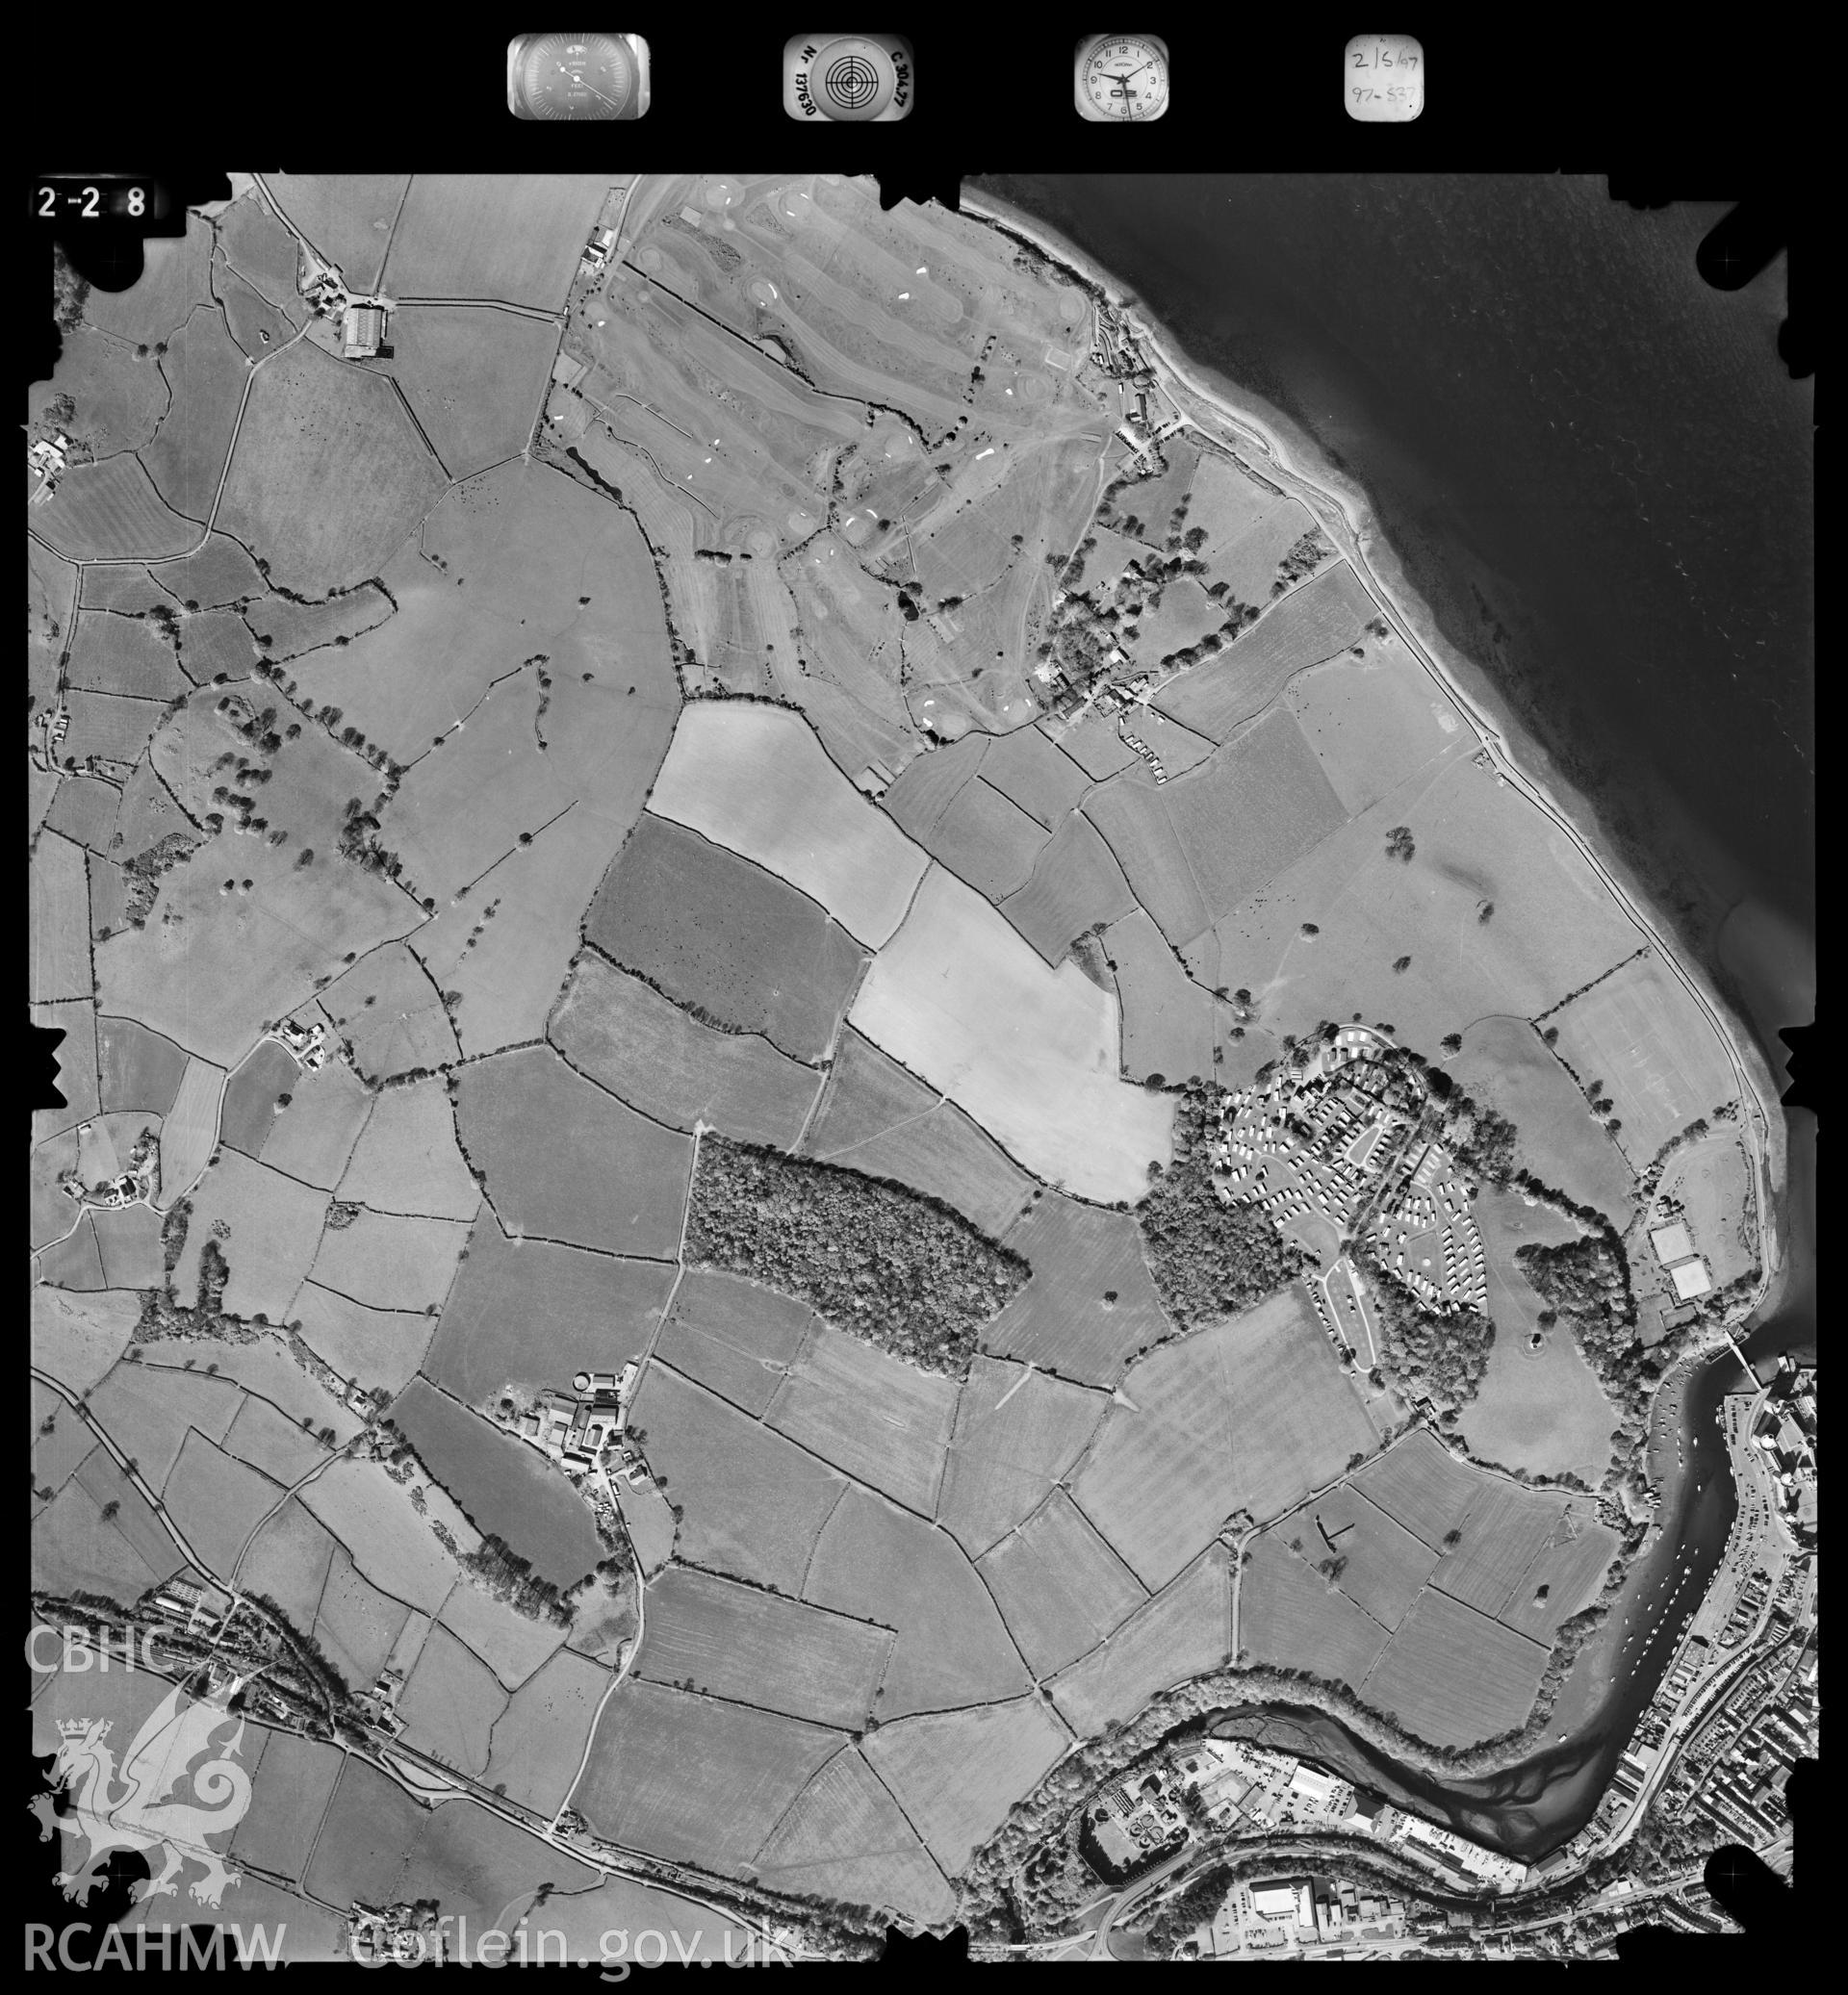 Digitized copy of an aerial photograph showing the Menai straits area area, taken by Ordnance Survey, 1997.